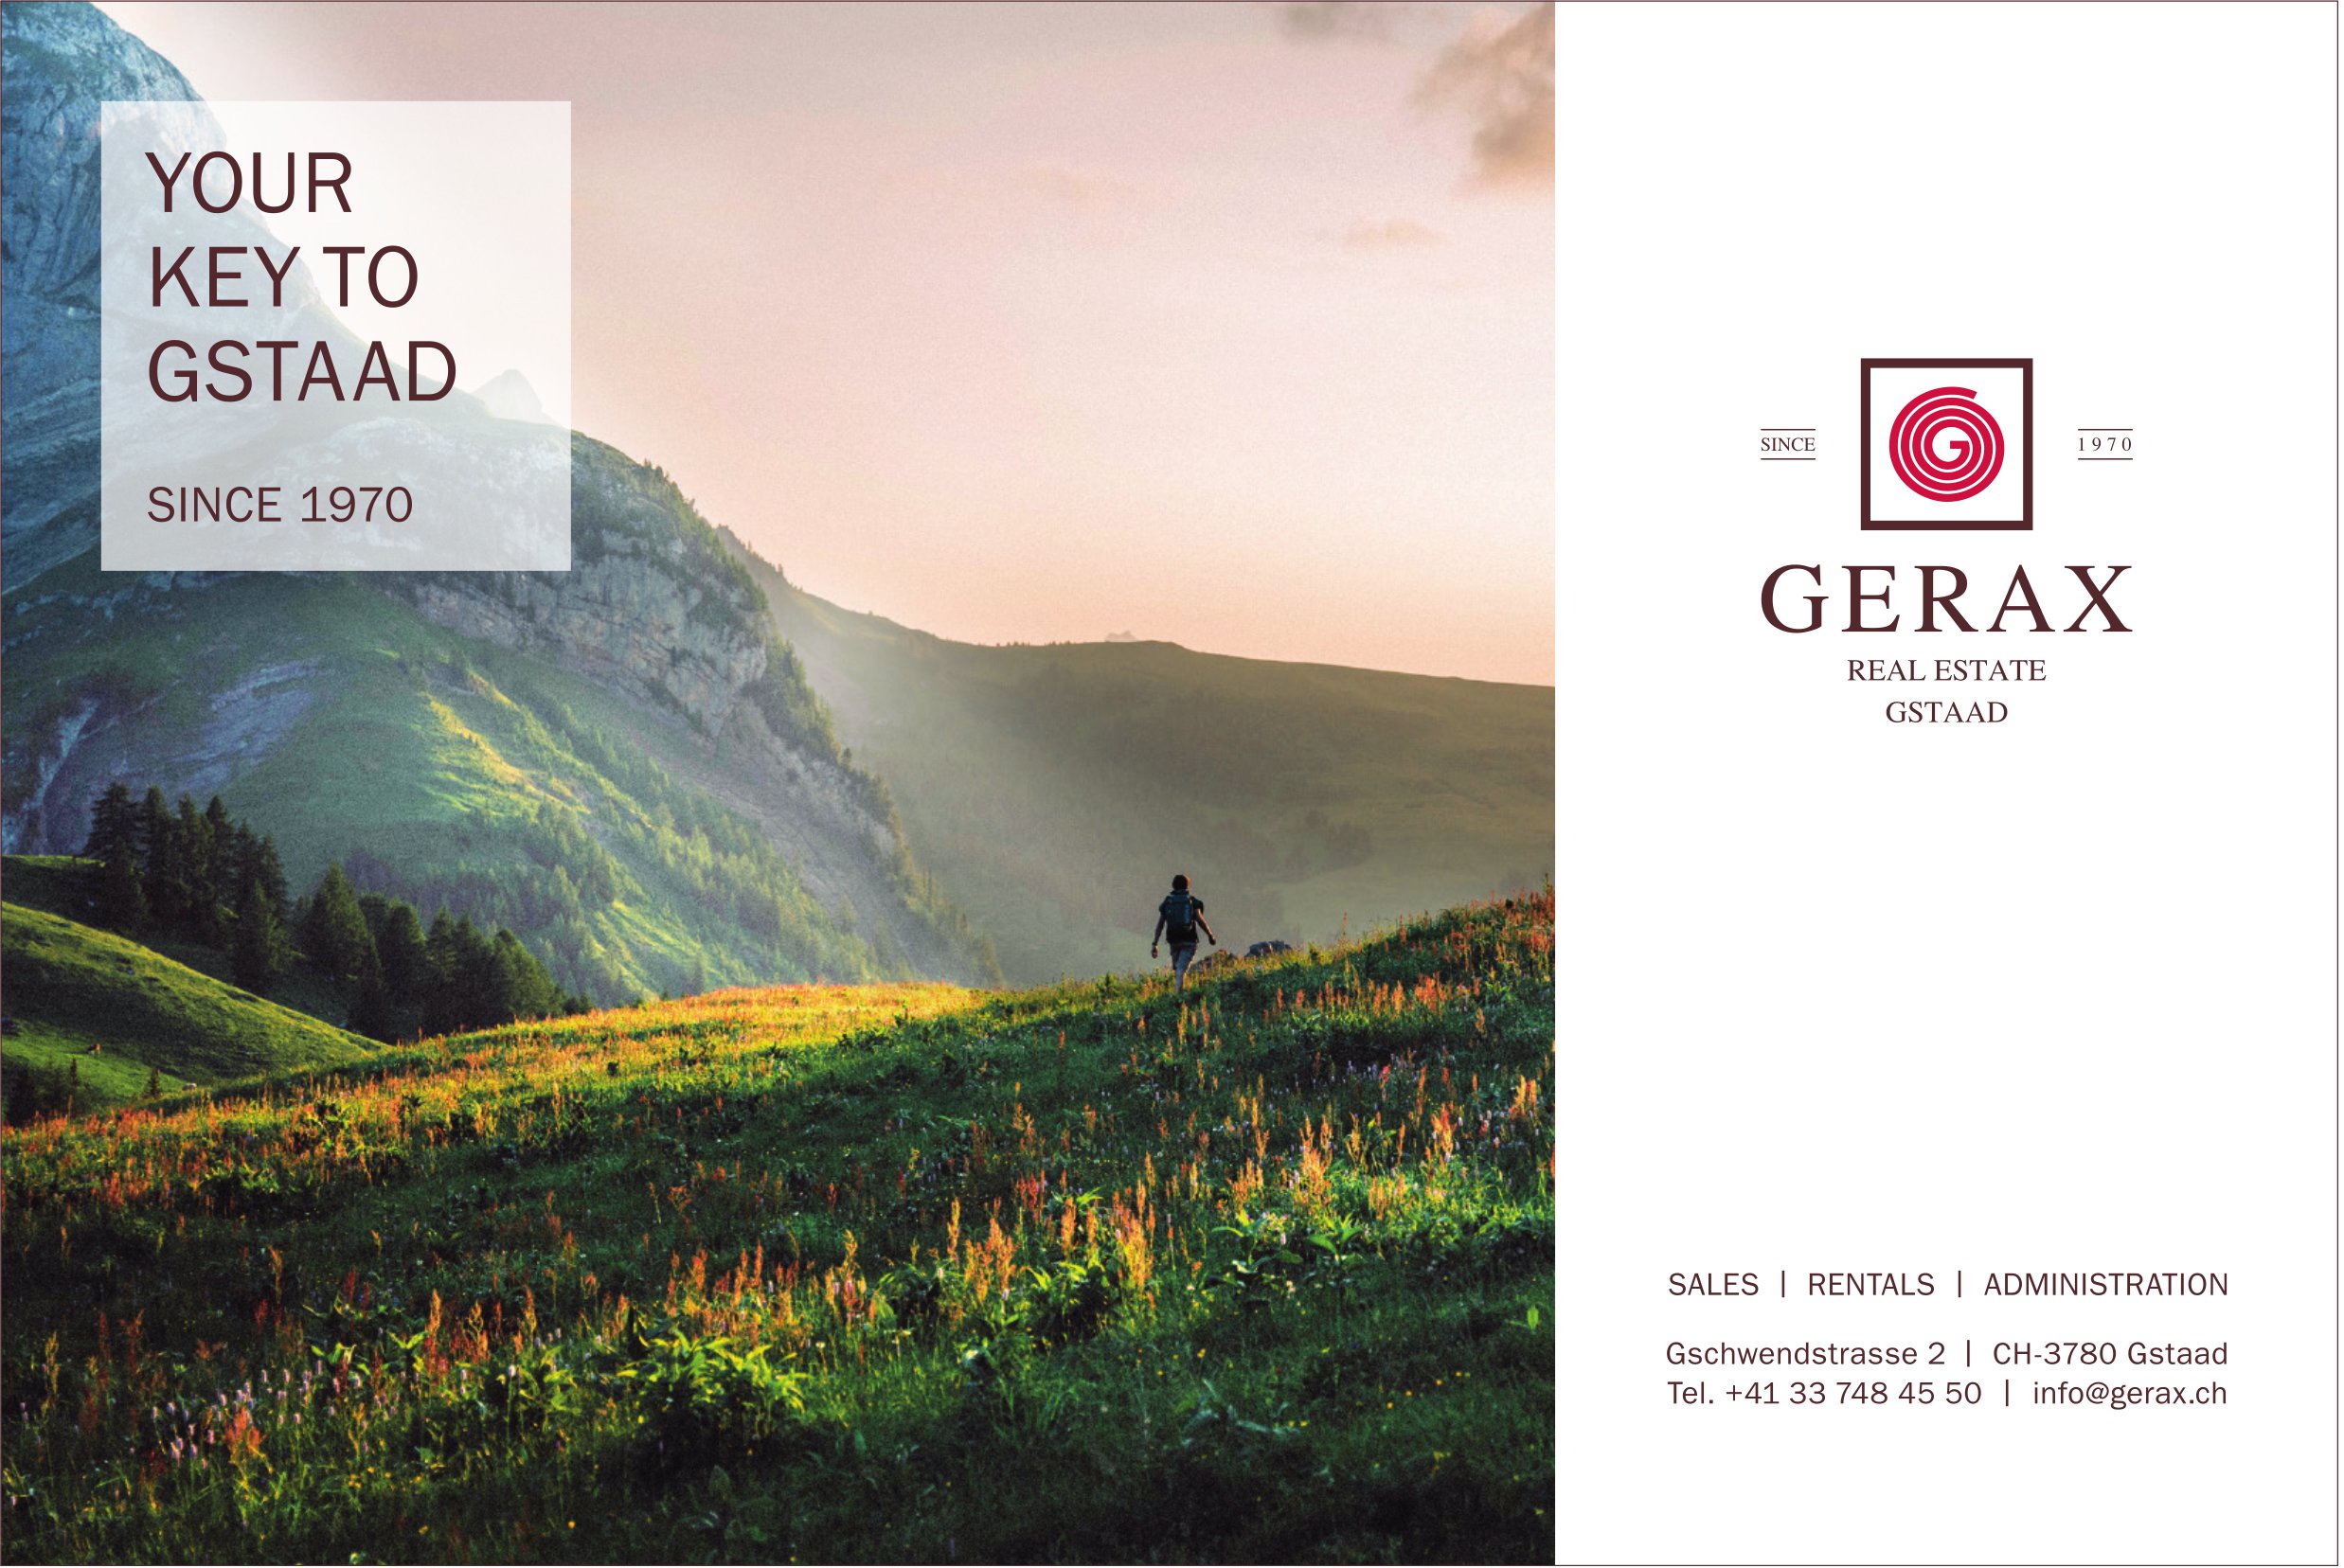 Gerax Real Estate, Your key to Gstaad